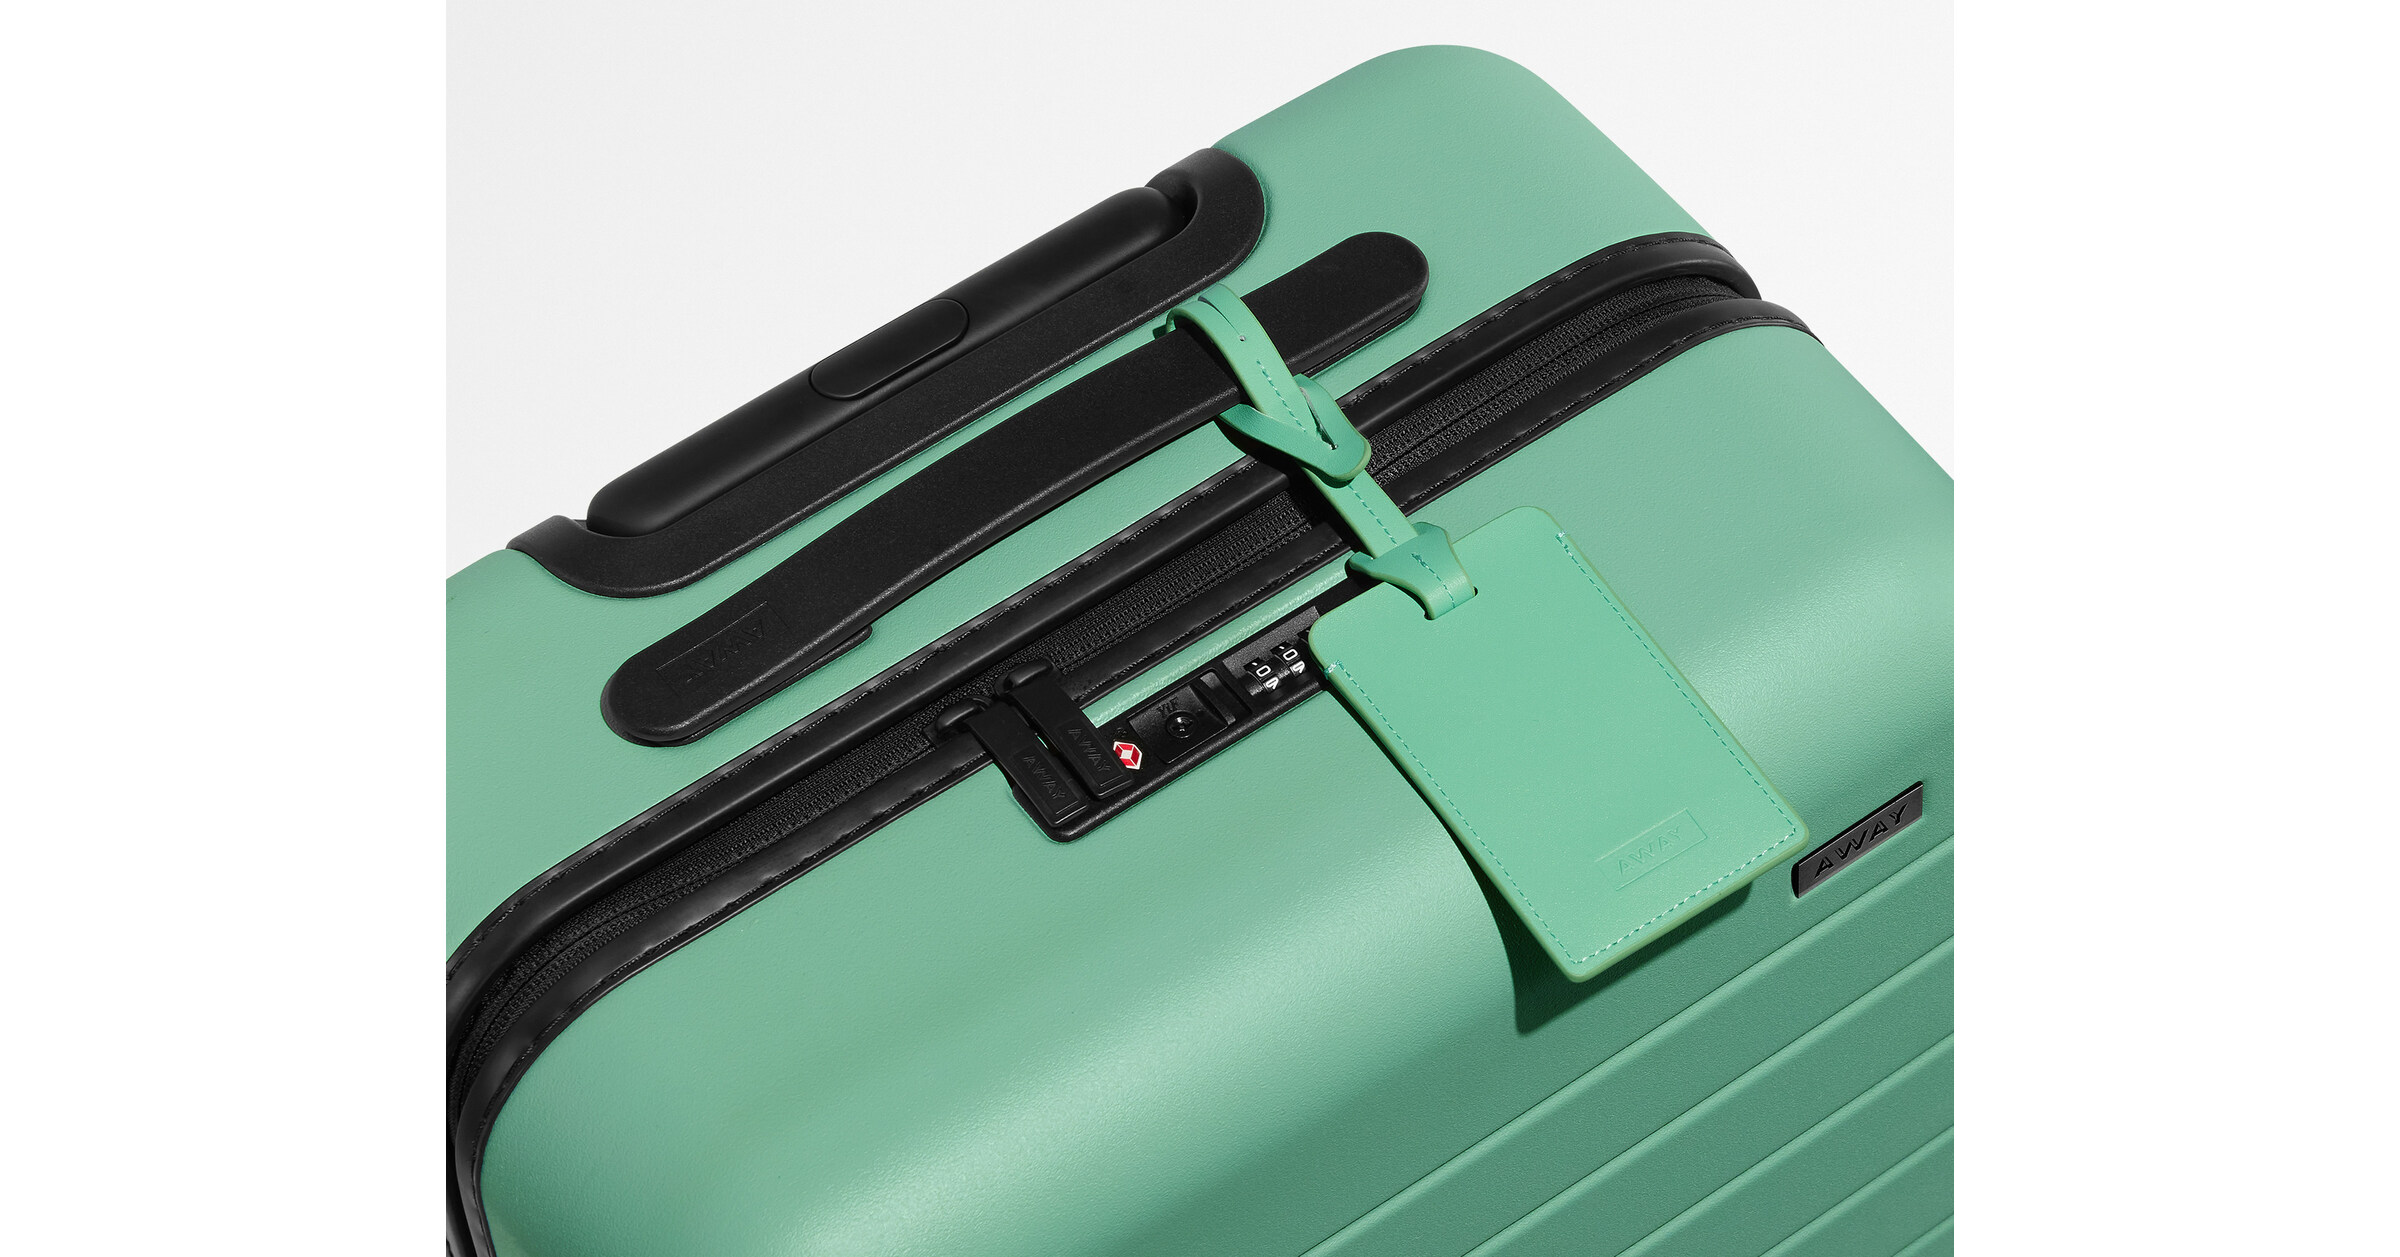 RIMOWA Redesigned Its Iconic Bags In New Signature Colors Inspired by  Tanzania